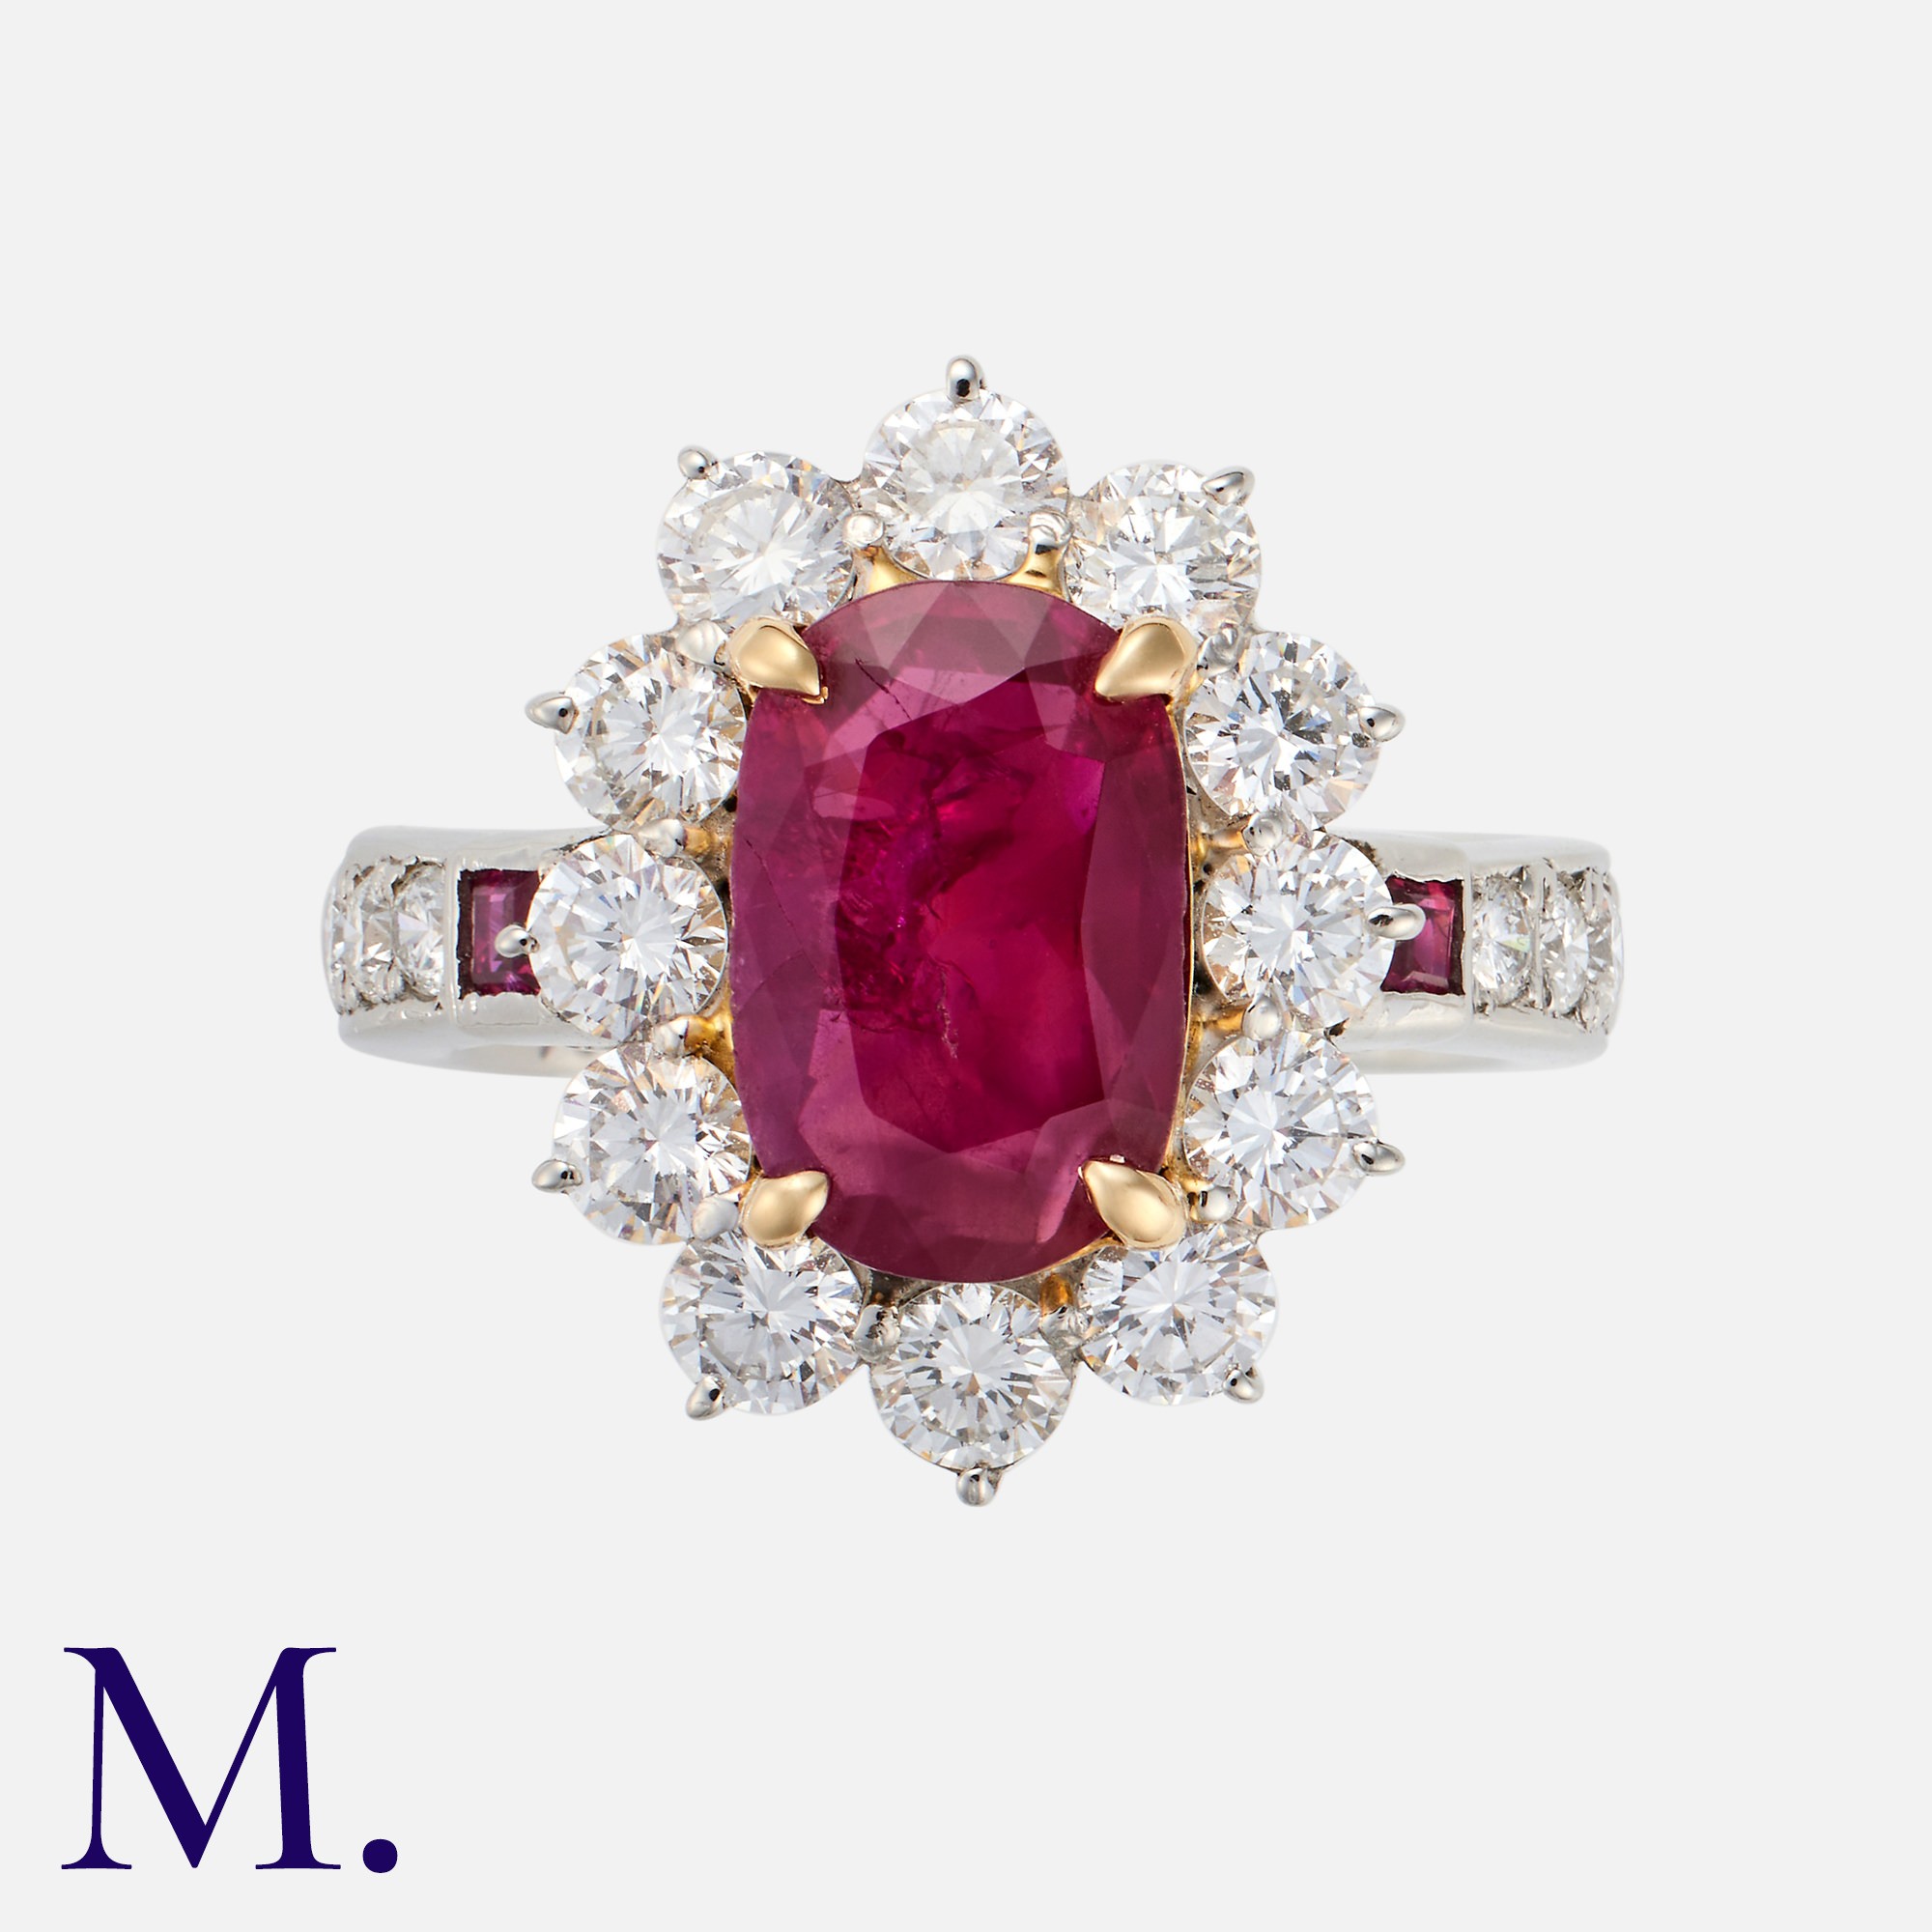 A Burma No Heat Ruby & Diamond Cluster Ring in 18k white gold and platinum set with a principal oval